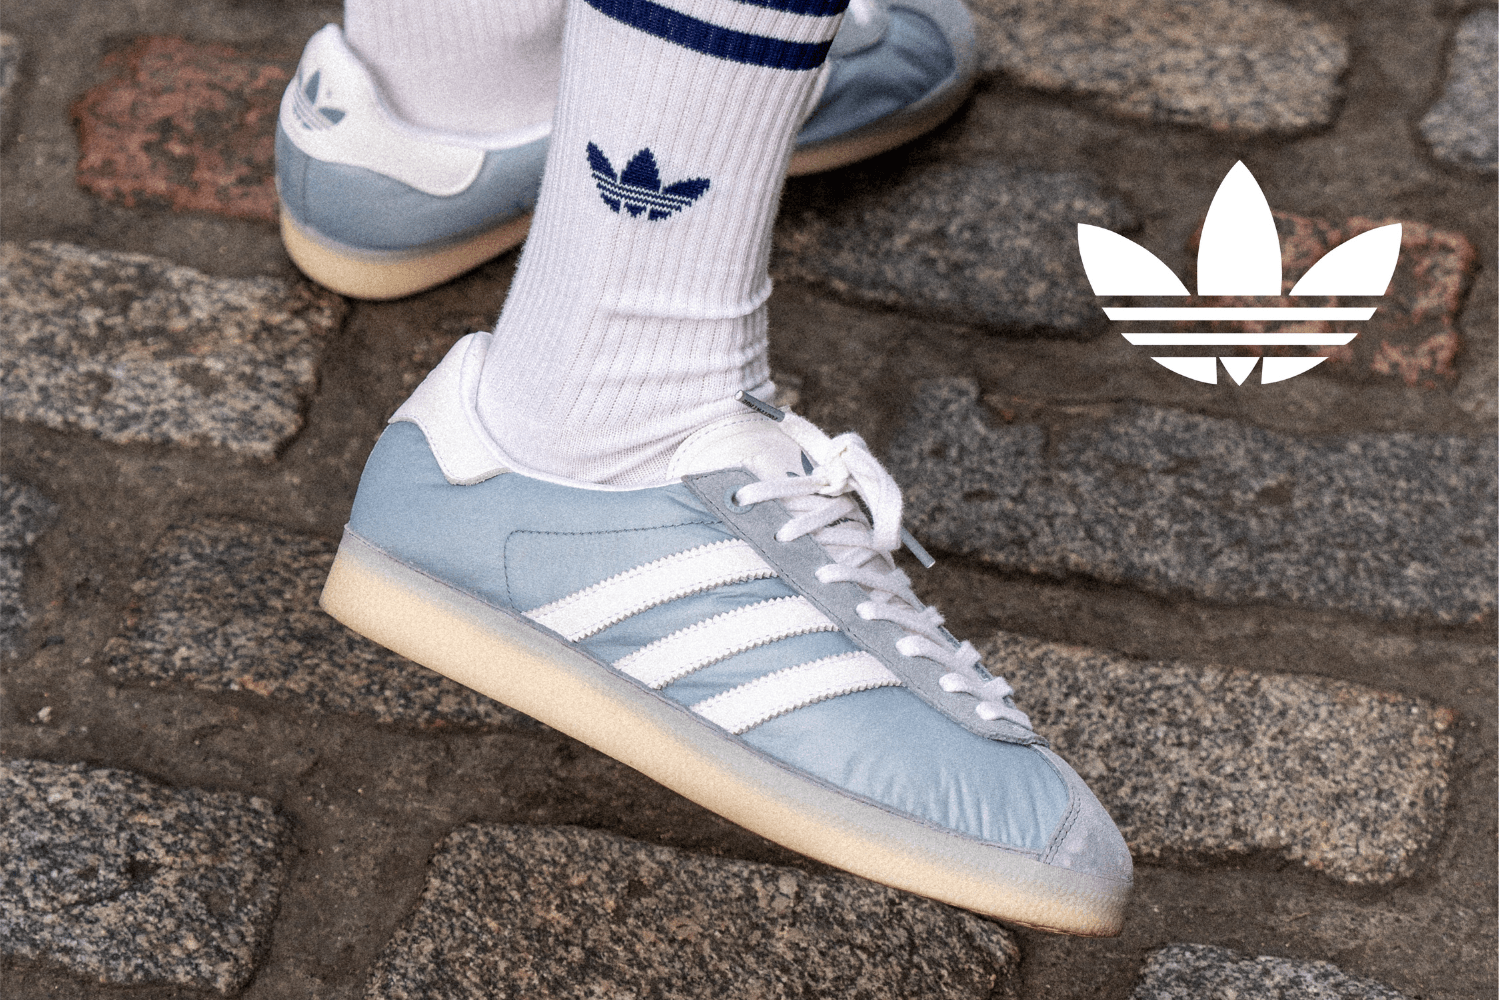 Footpatrol teams up with adidas to release an unique Gazelle 85